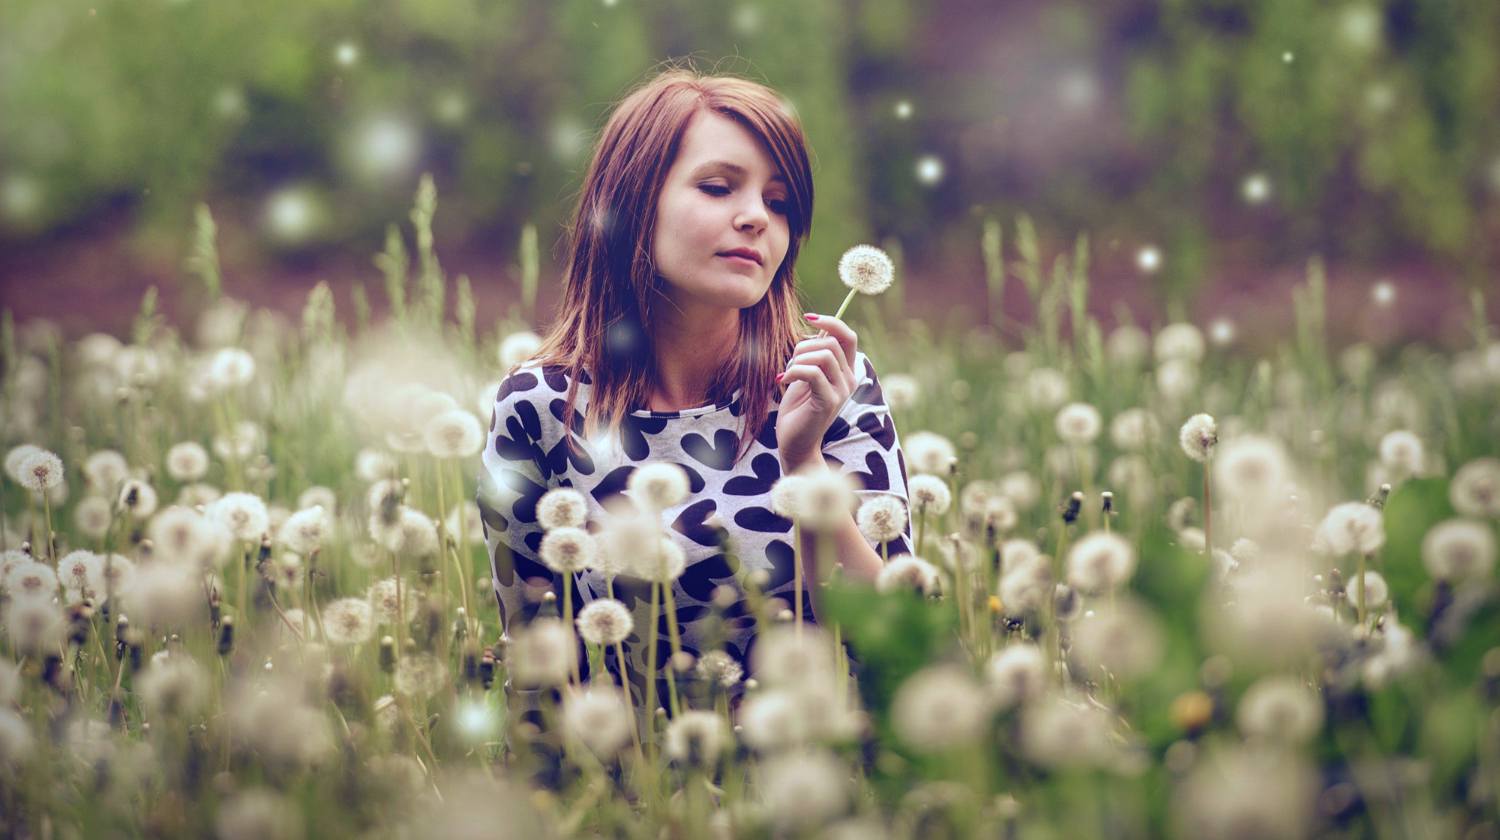 Feature | Woman in dandelions garden | Benefits of Dandelions | More Reason To Love The Survival "Weed"